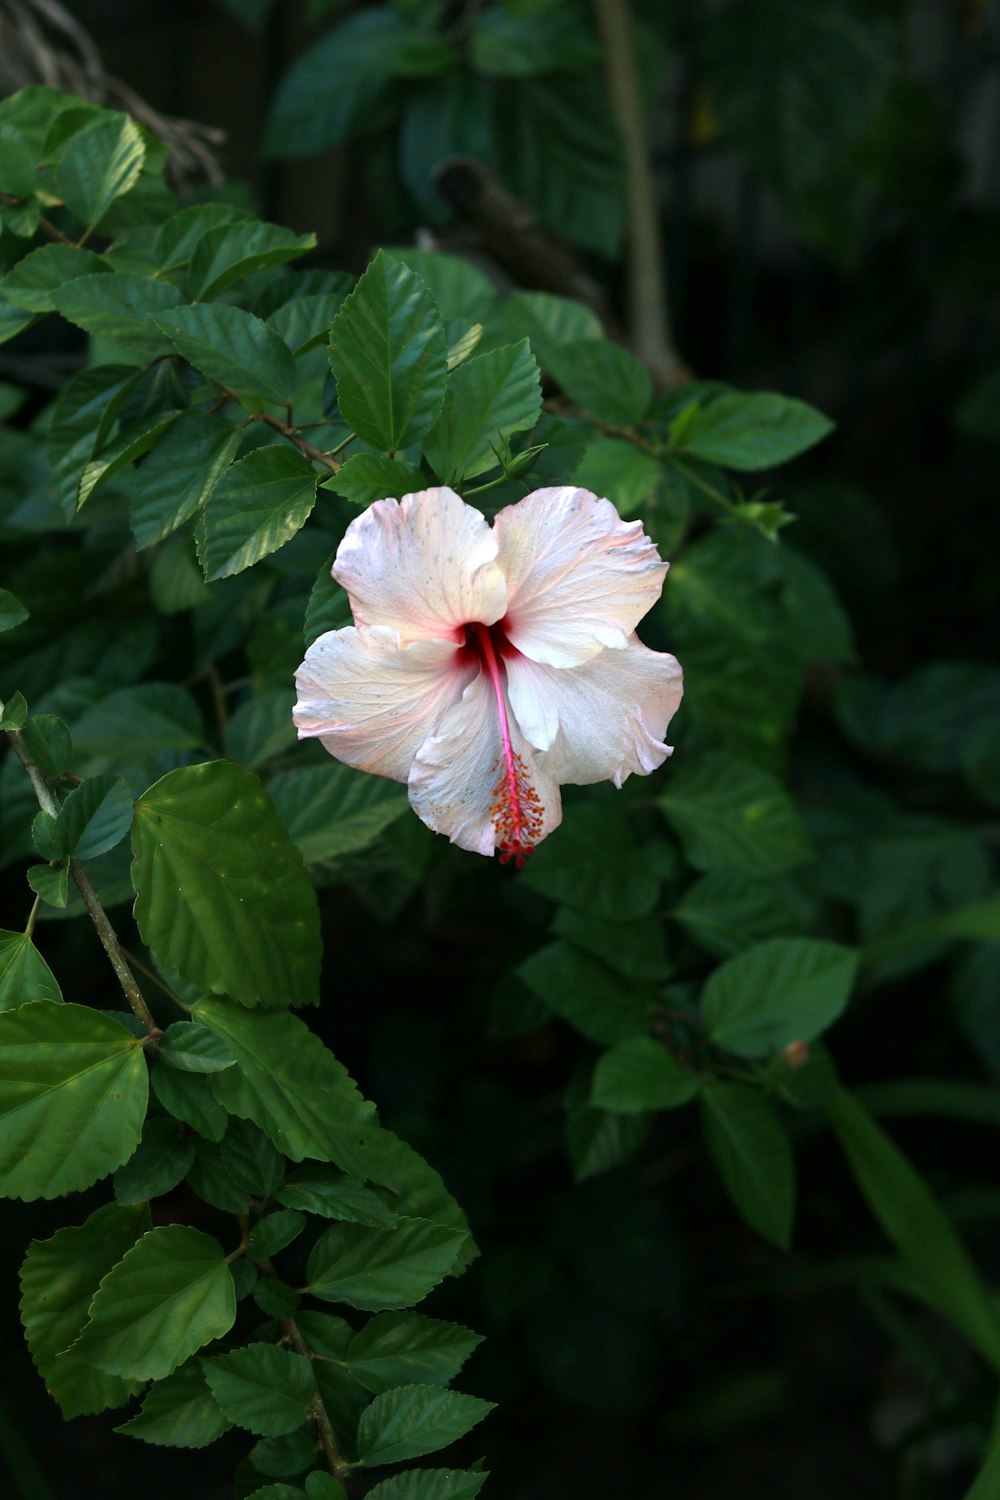 white and red hibiscus flower in bloom during daytime